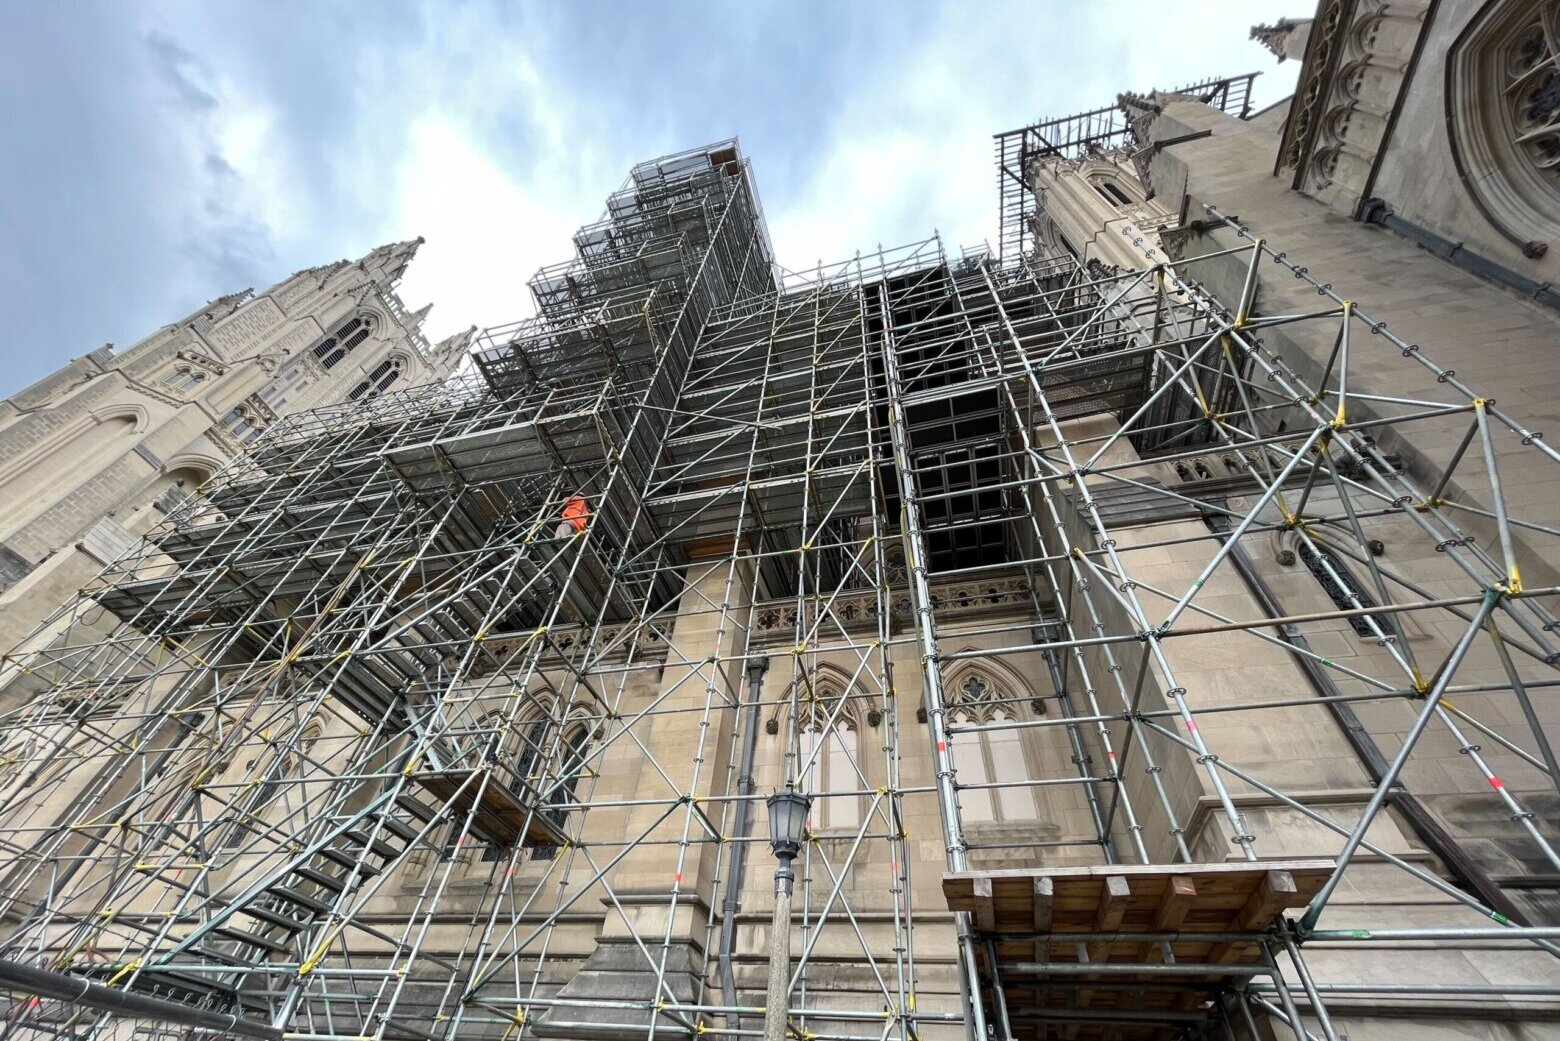 National Cathedral still “cut off” in earthquake damage